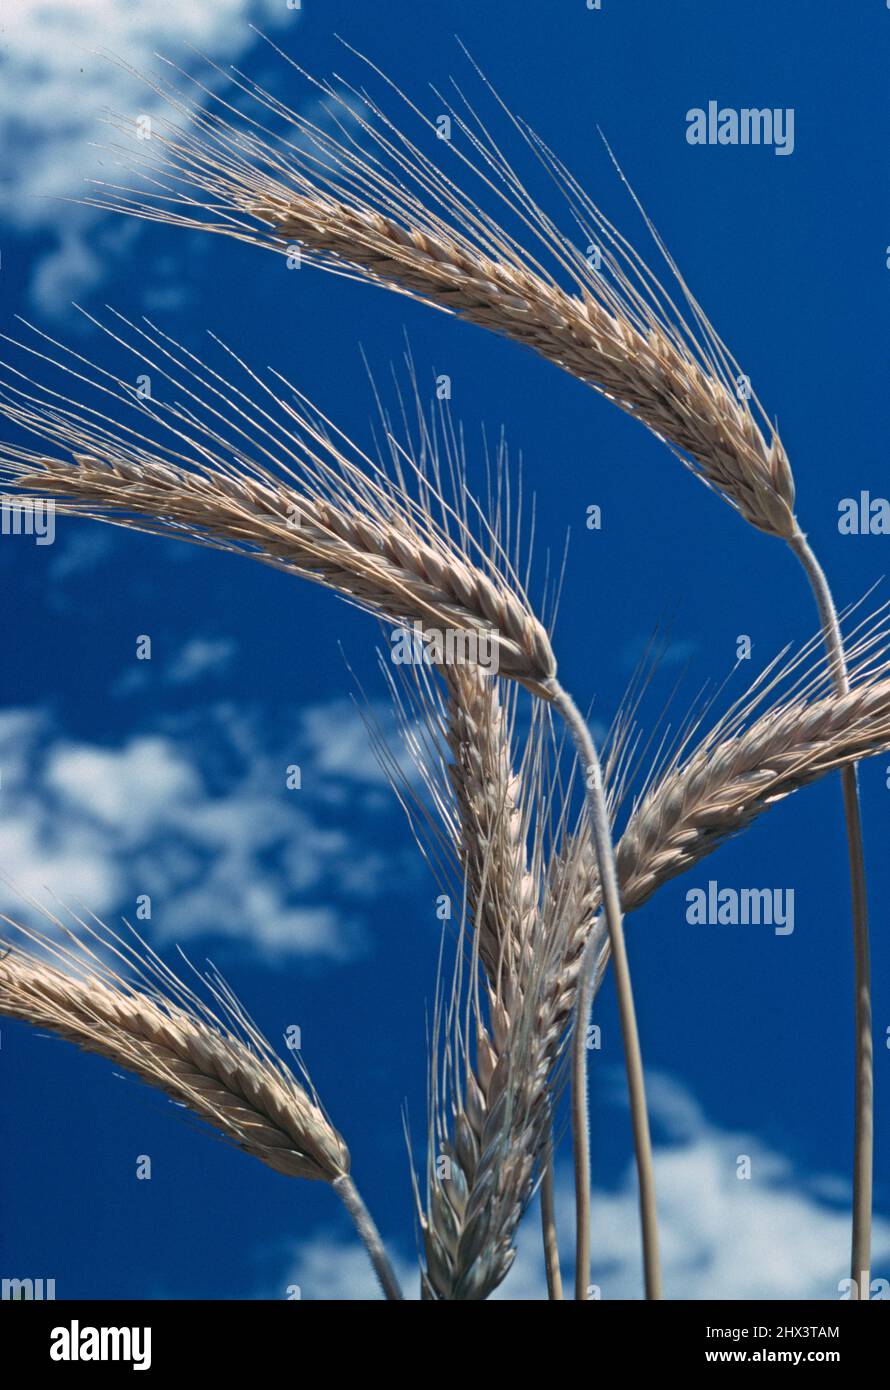 Australia. Agriculture. Close up of wheat. Stock Photo